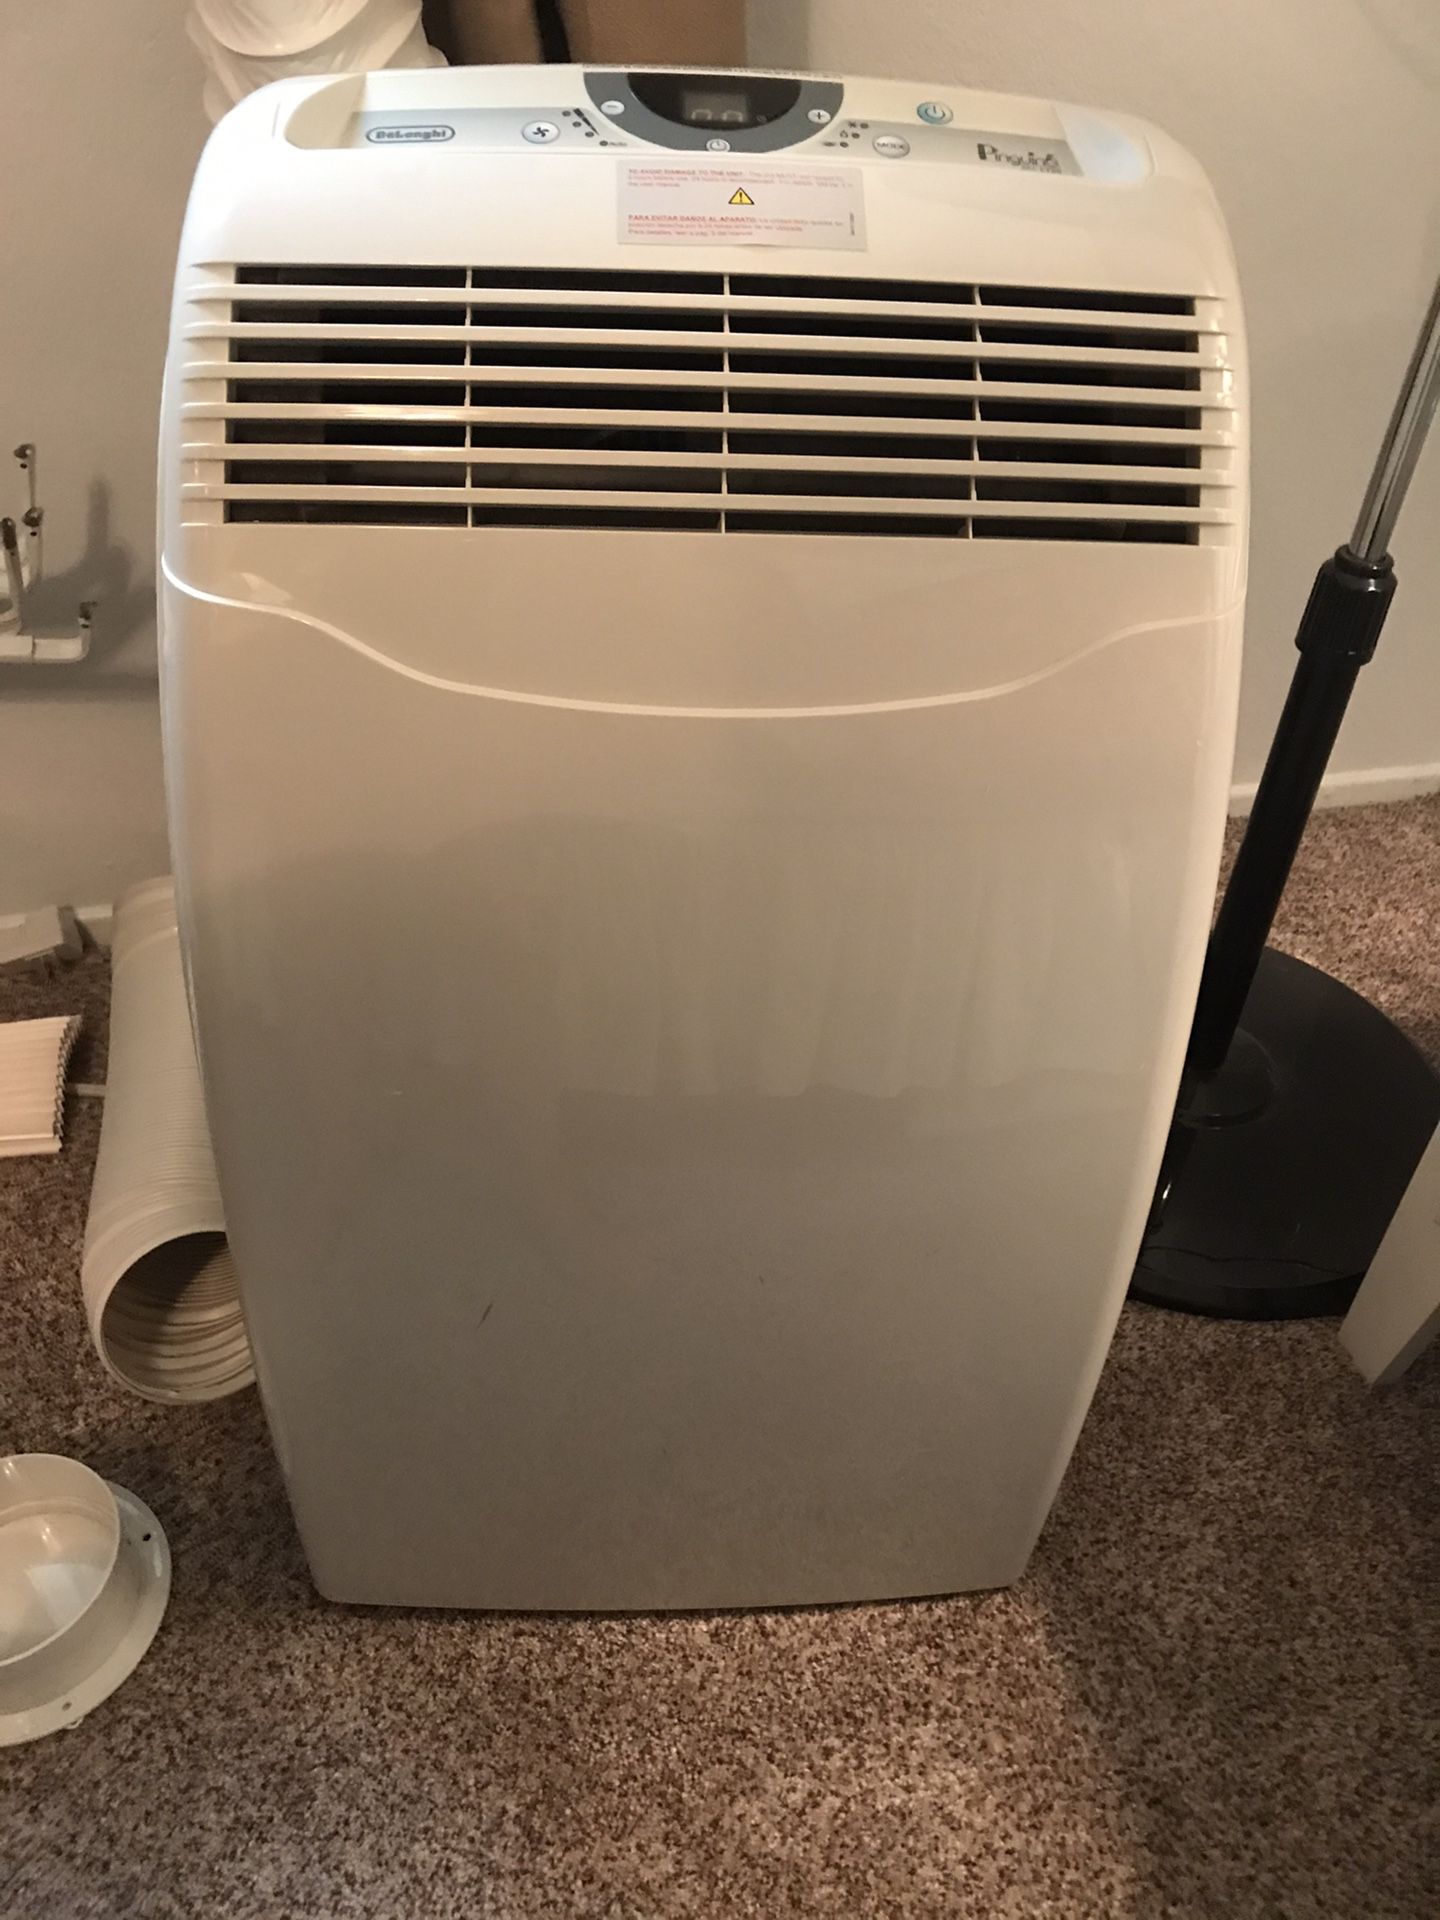 DeLonghi portable Air Conditioner 9000 BTU W REMOTE AND WALL EXTENDER